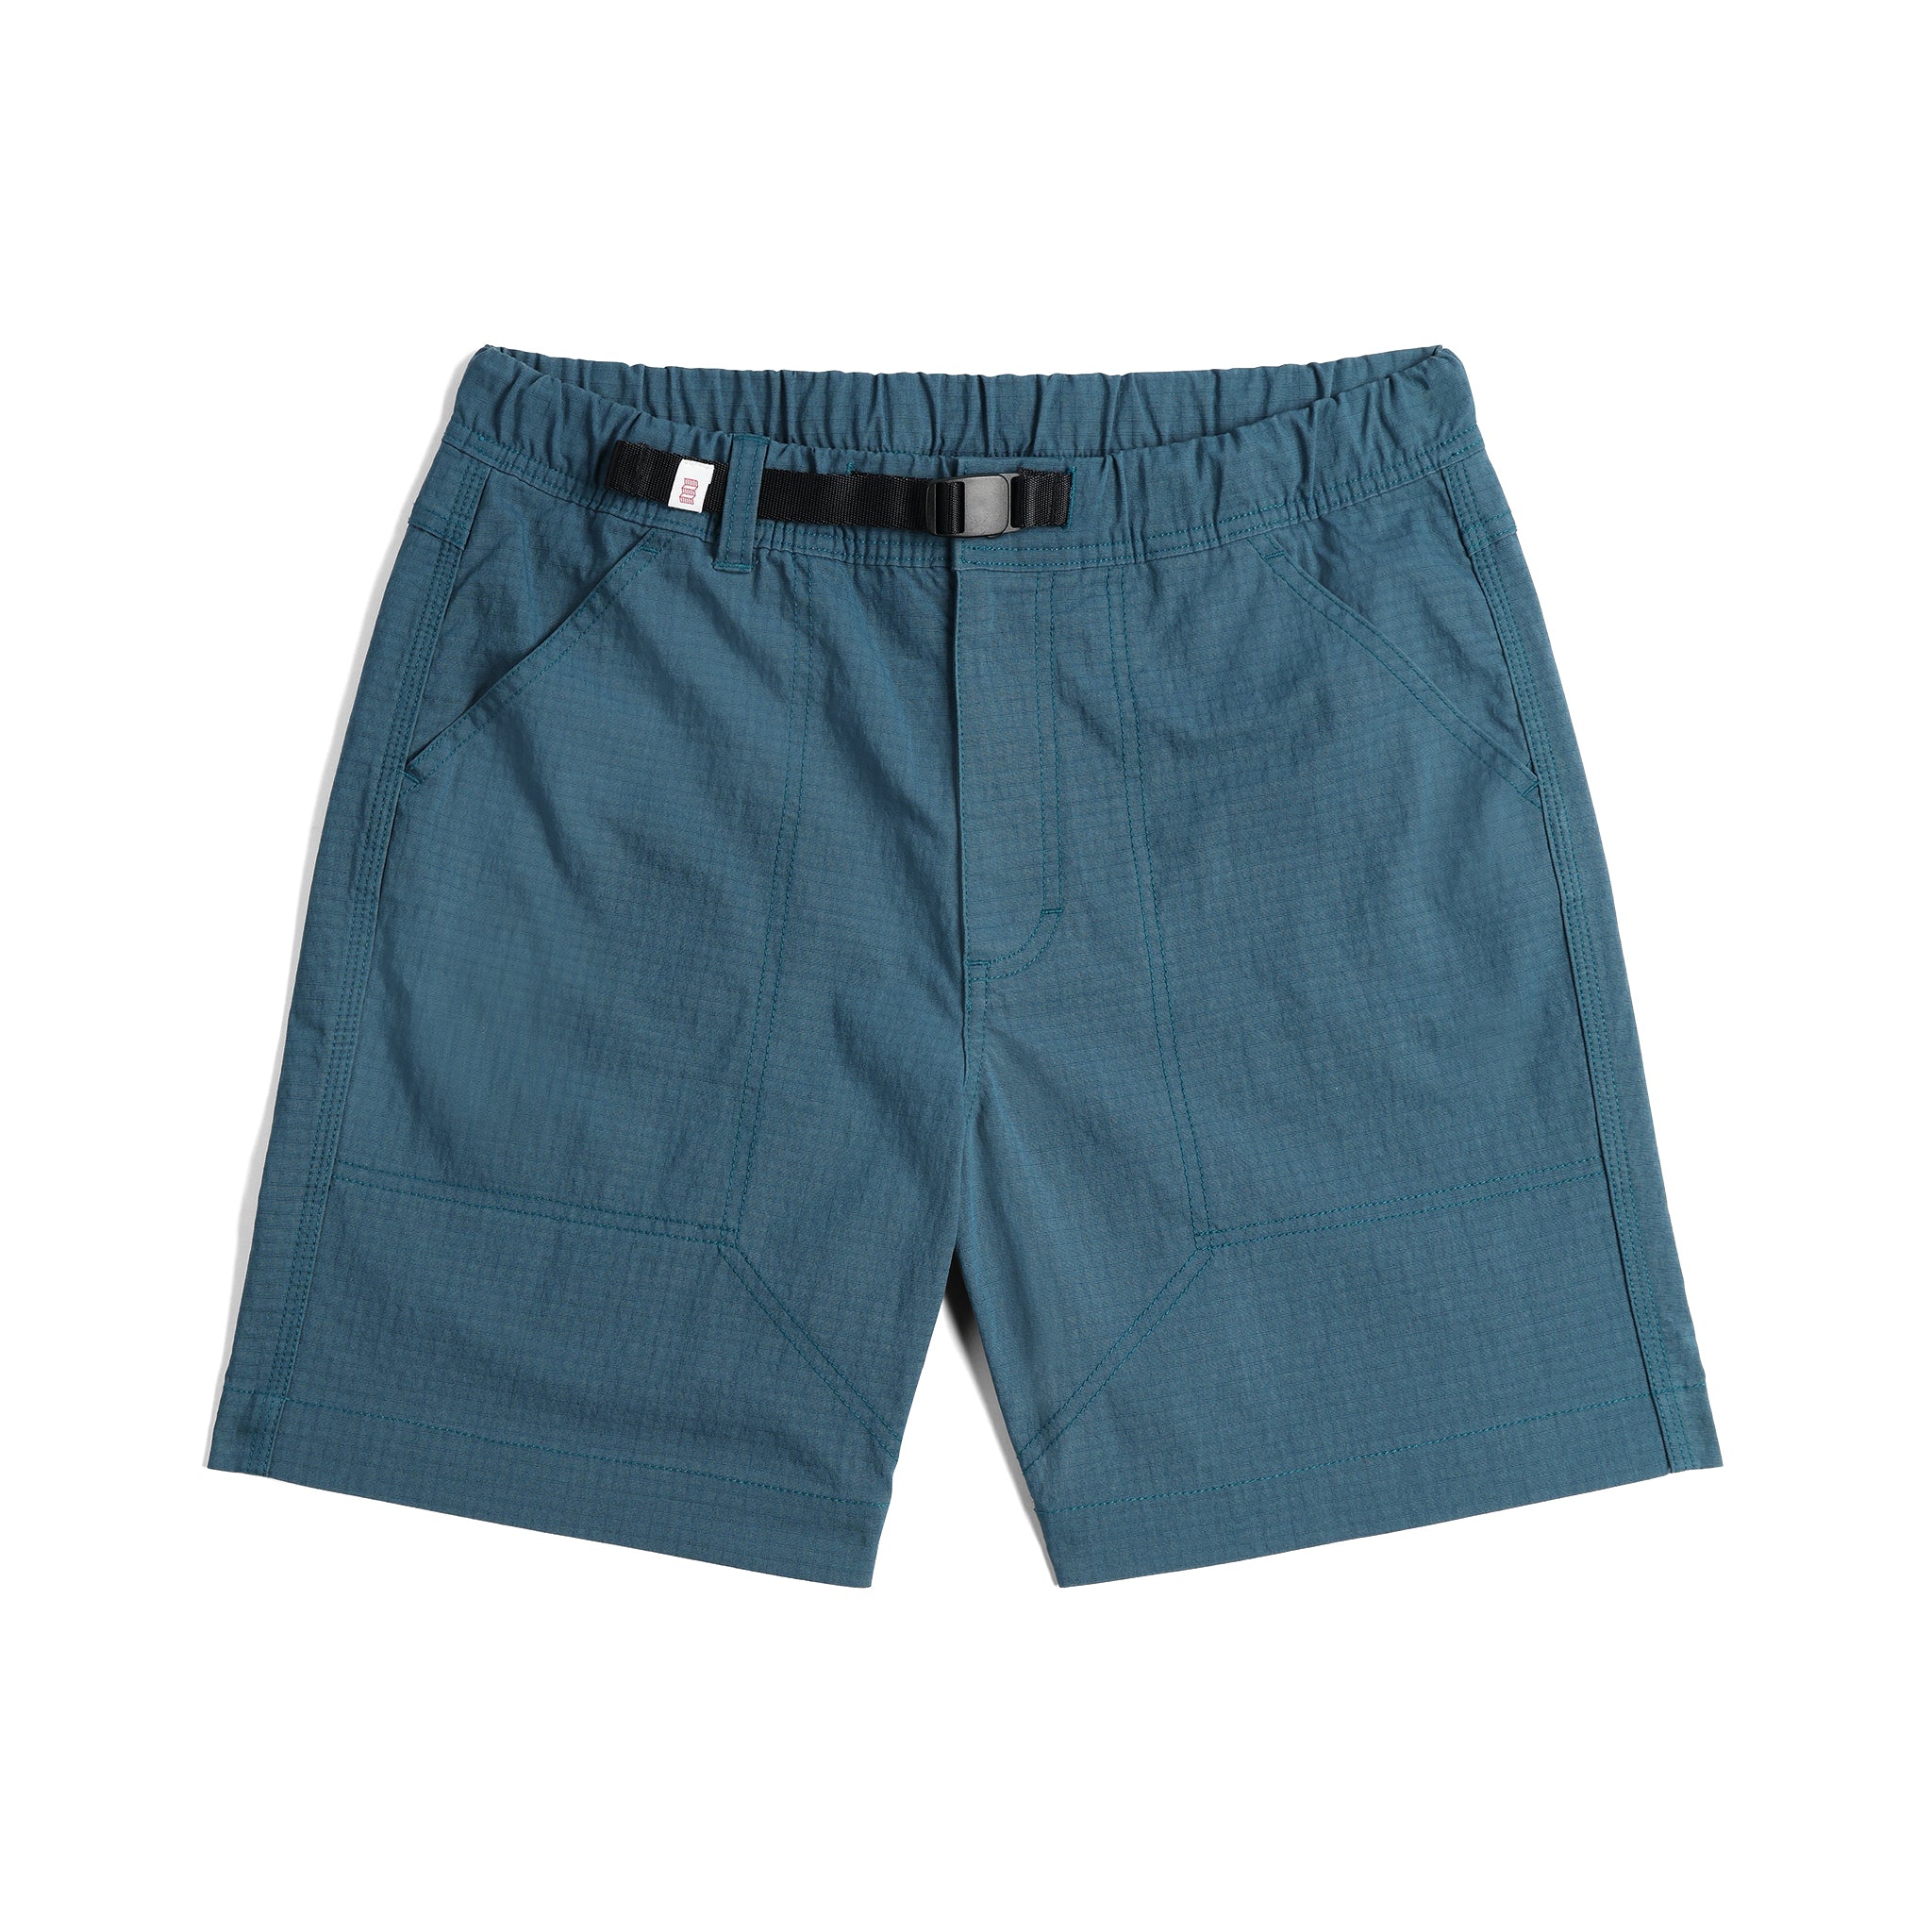 Front View of Topo Designs Mountain Short Ripstop - Men's in "Pond Blue"